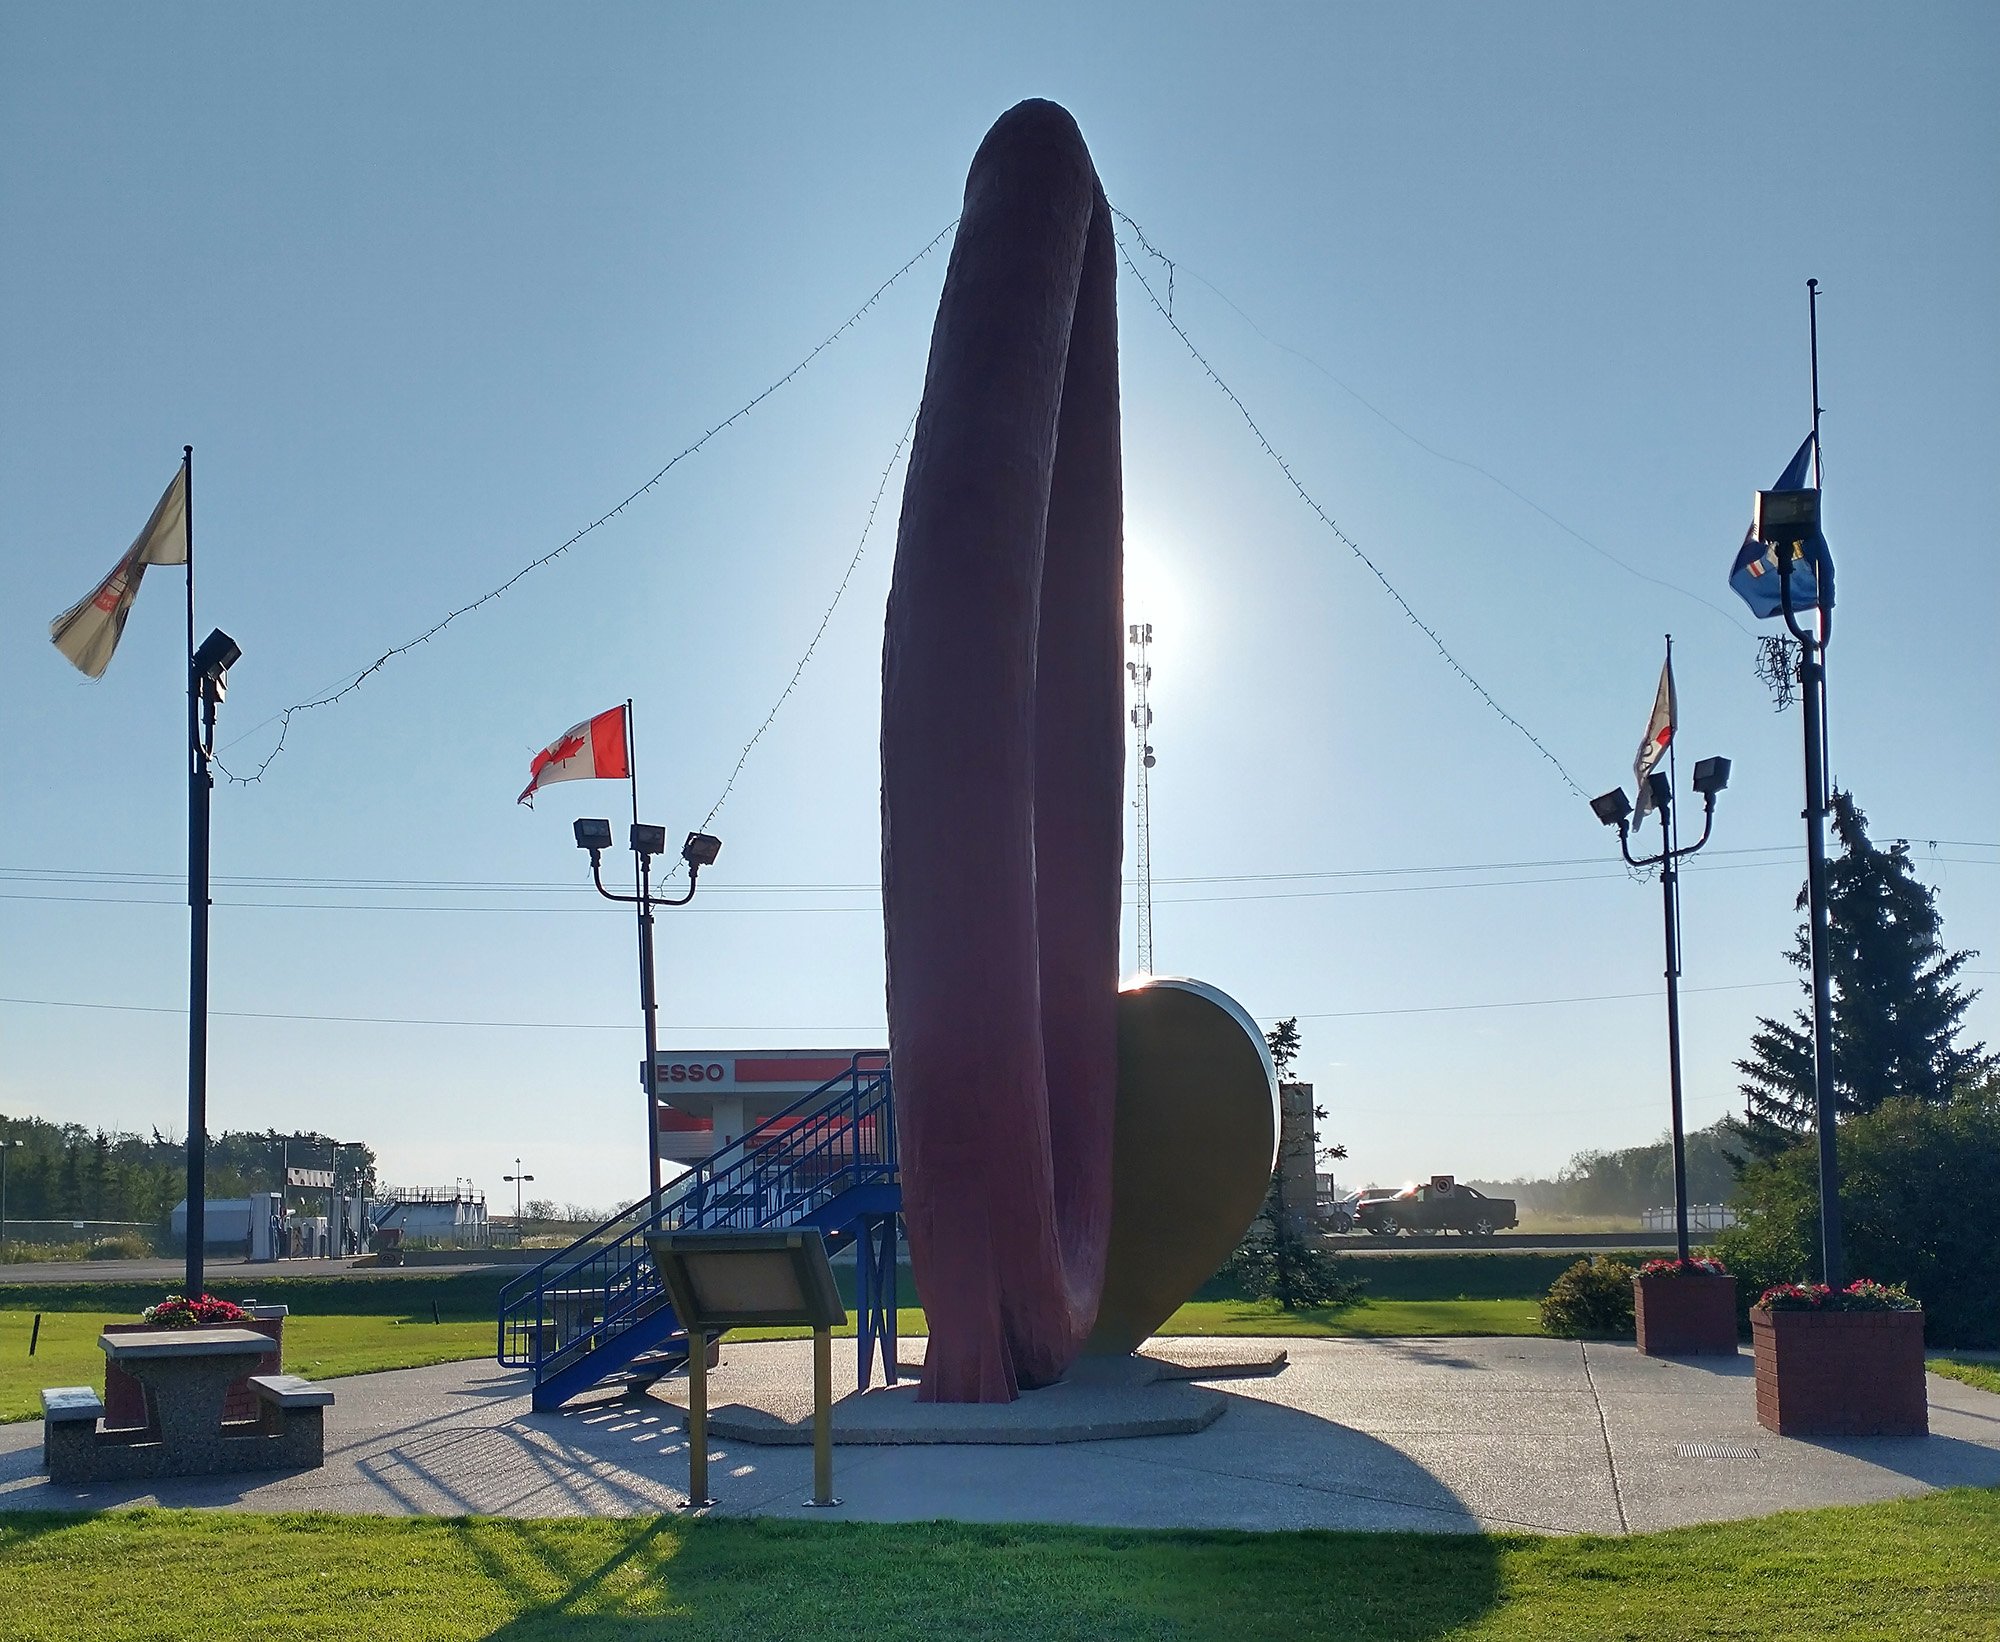 Next up: Mundare, home of the largest sausage!